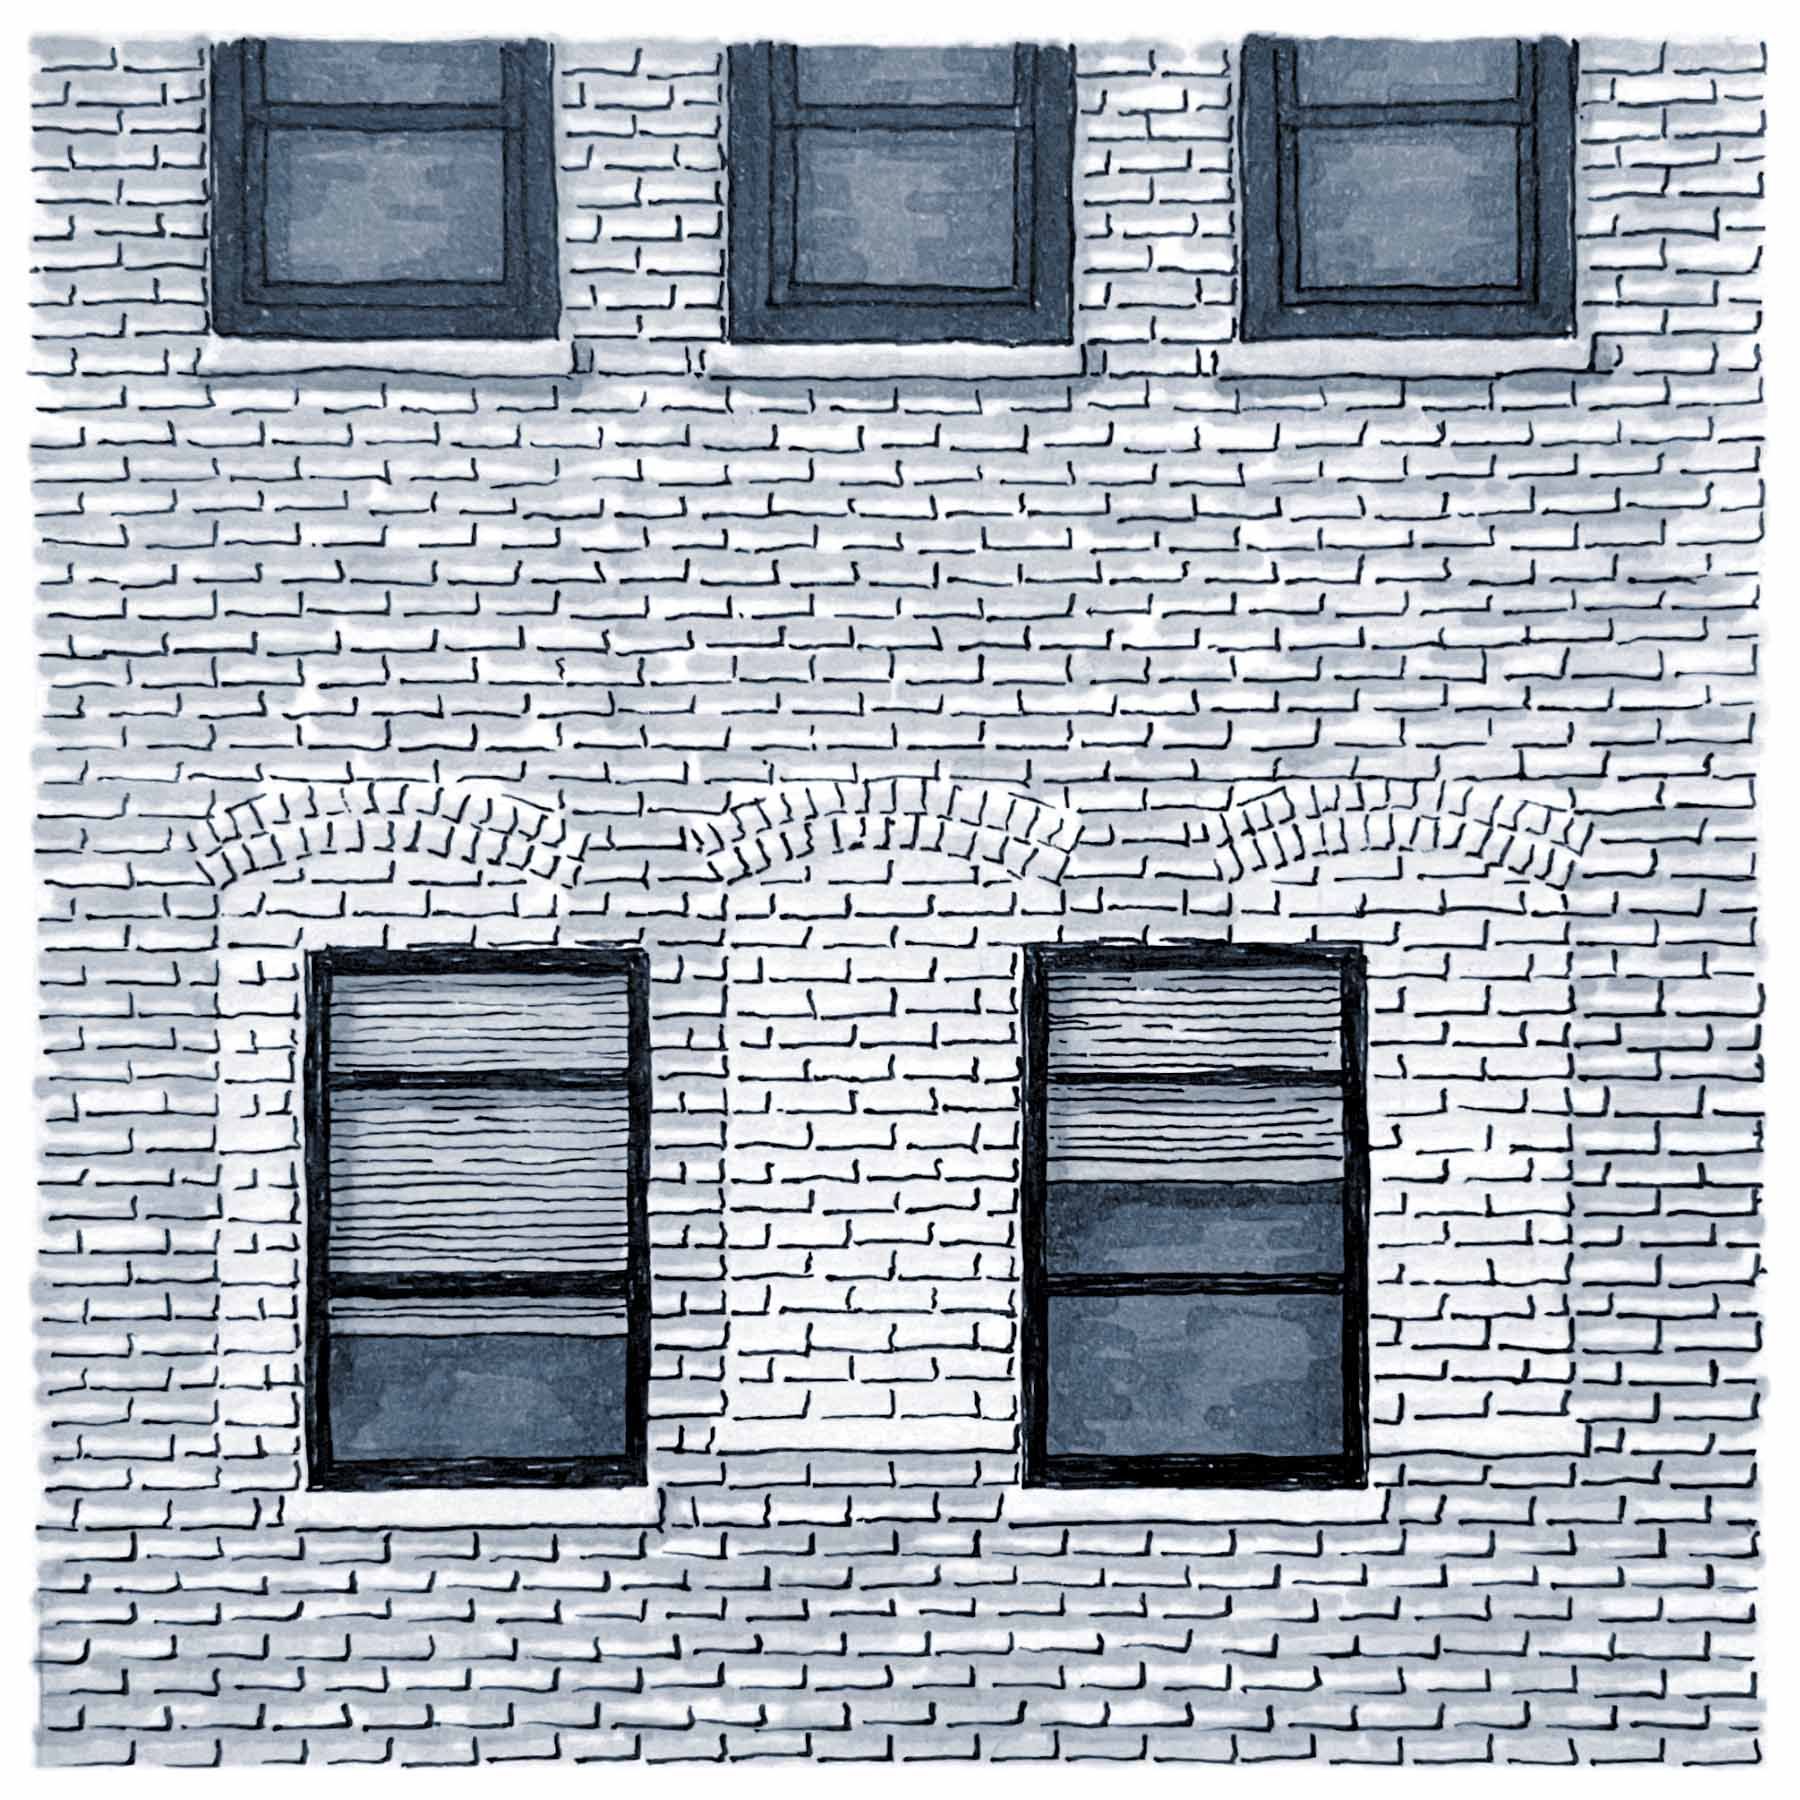 A pen and ink drawing of four windows in a brick wall